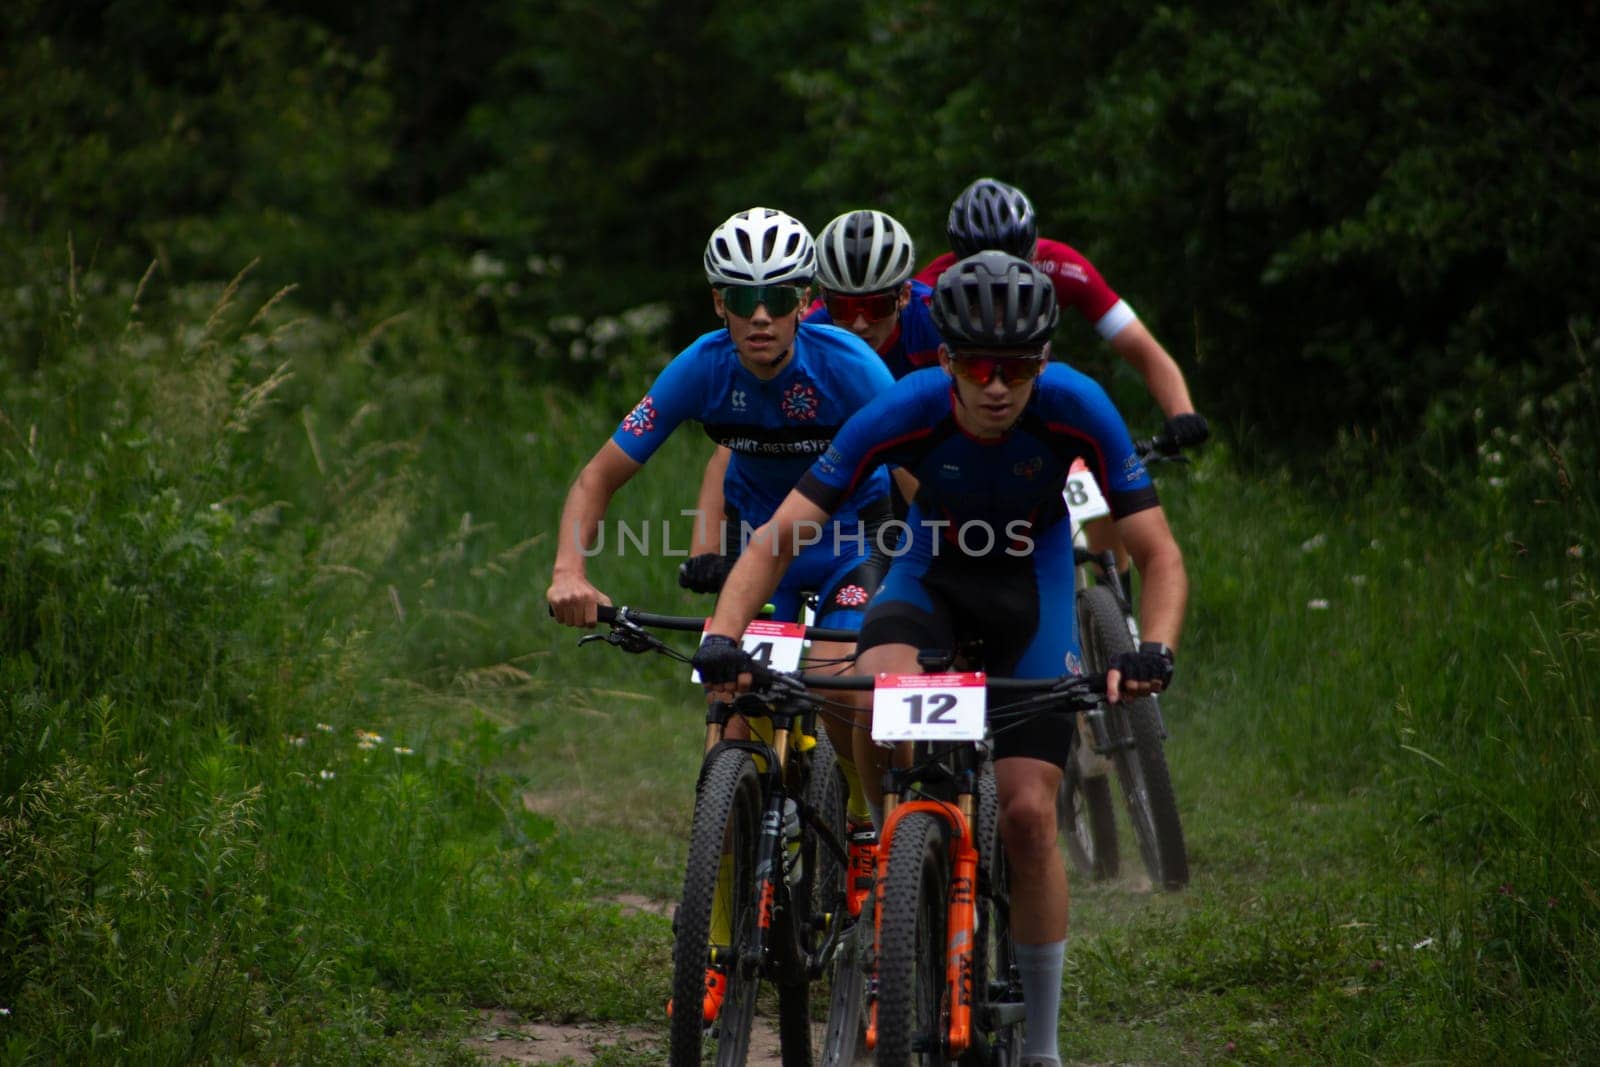 Row of athletes at off-road cycling competition fight for position by timurmalazoniia